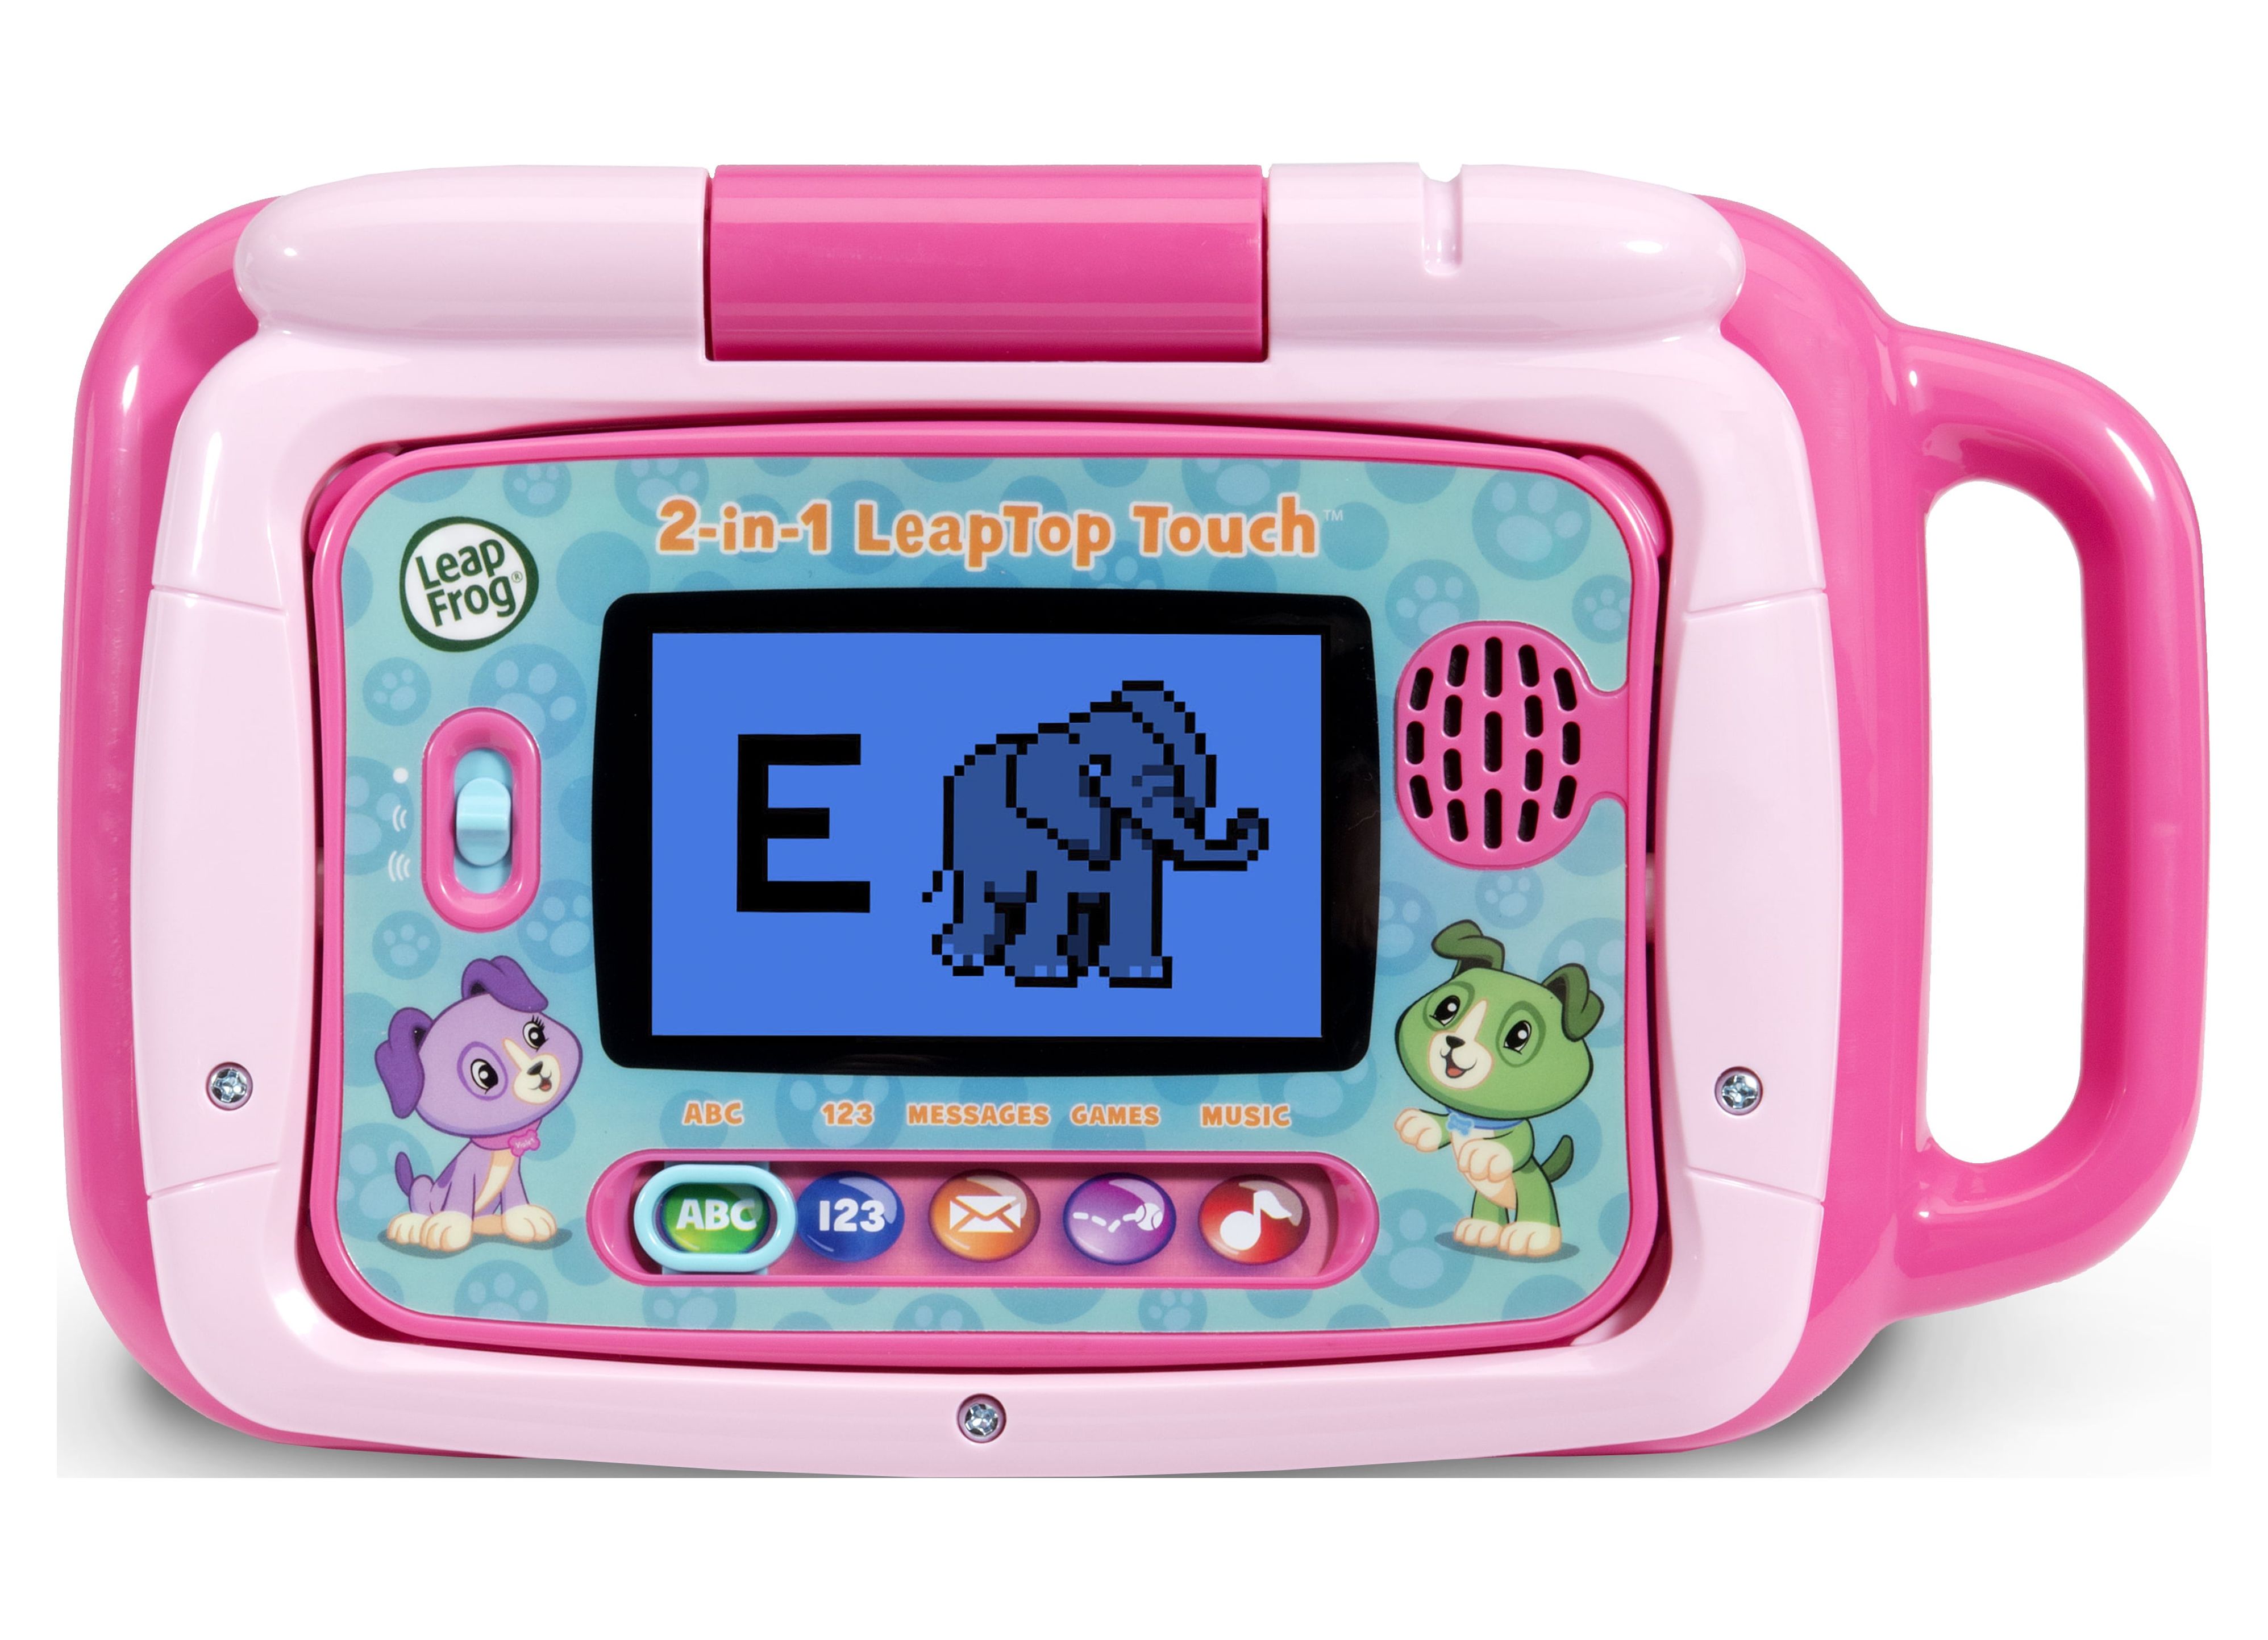 LeapFrog 2-in-1 LeapTop Touch for Toddlers, Electronic Learning System, Teaches Letters, Numbers - image 10 of 12